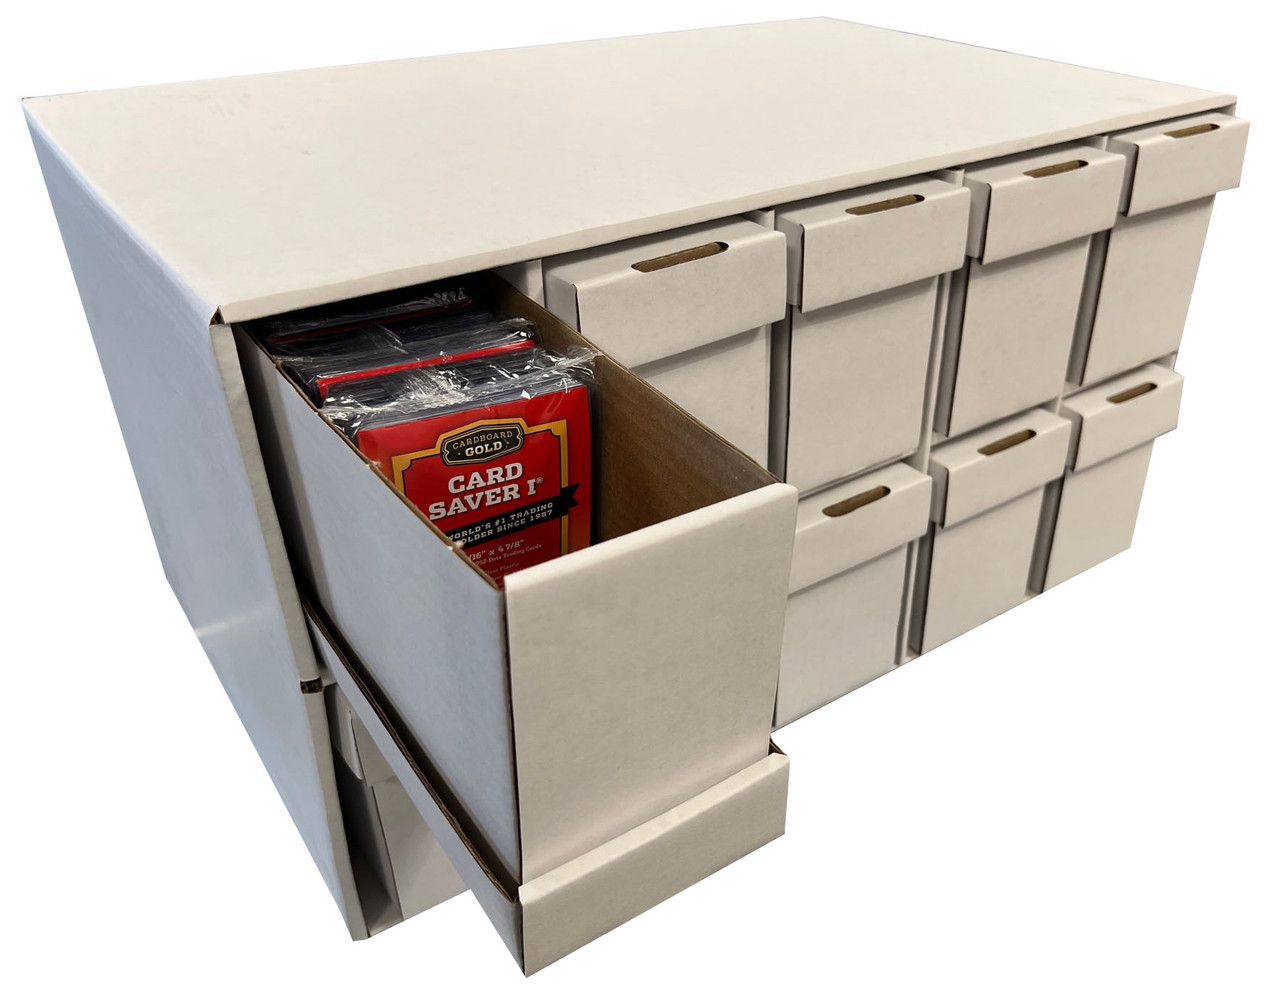 Max Protection Graded Card Penthouse Storage Box System - Holds Graded Cards  and Card Saver 1 - Columbia Hobby - Card Savers, Toploaders, Sleeves and  More